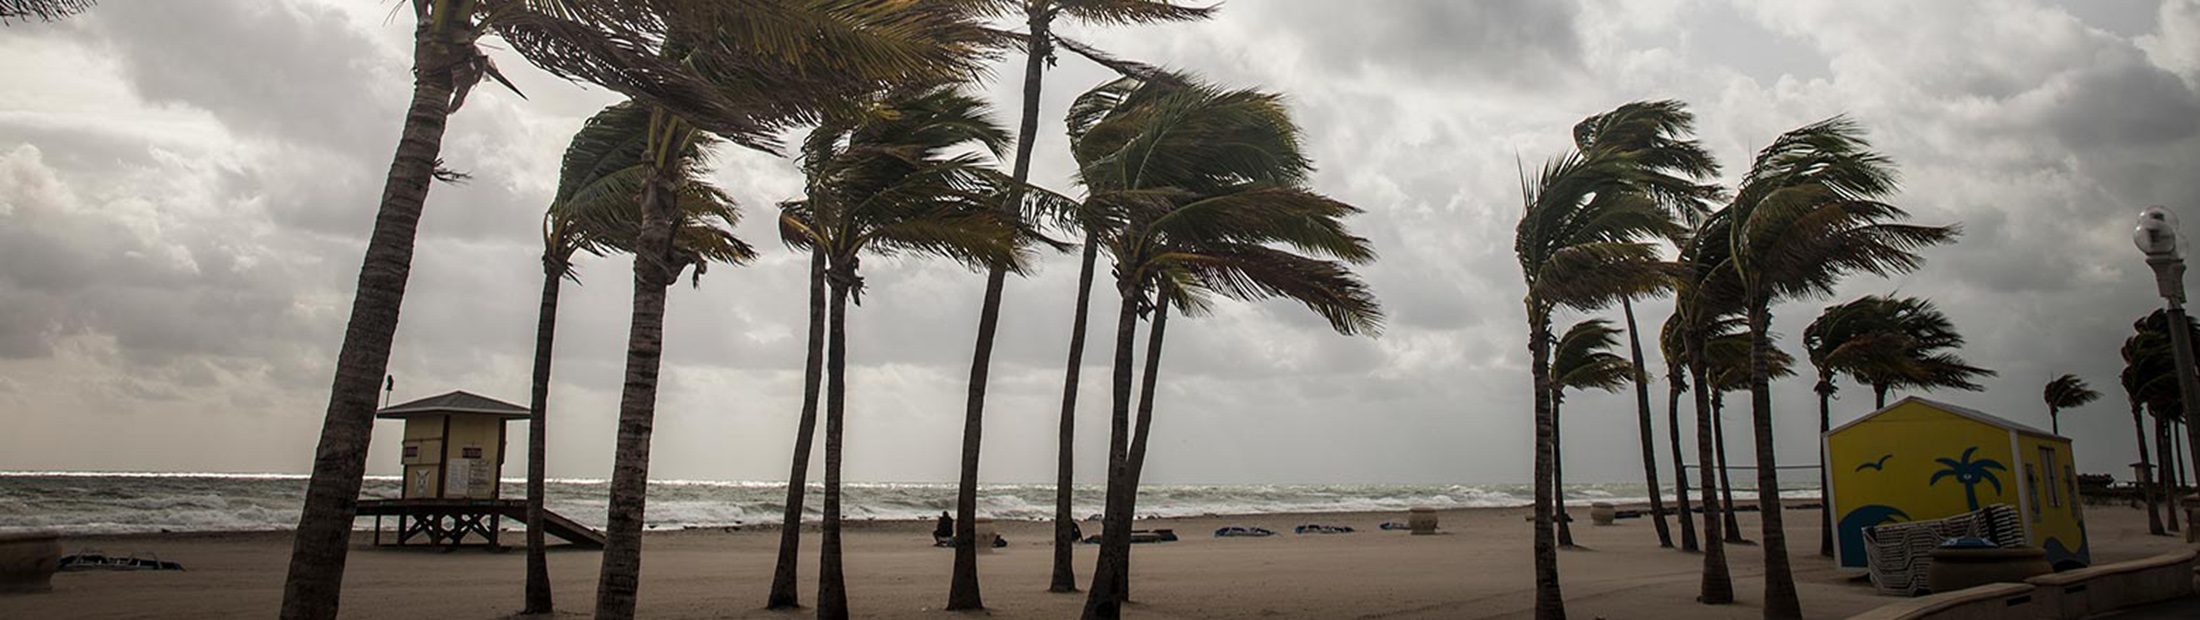 Palm trees being blown by strong wind.